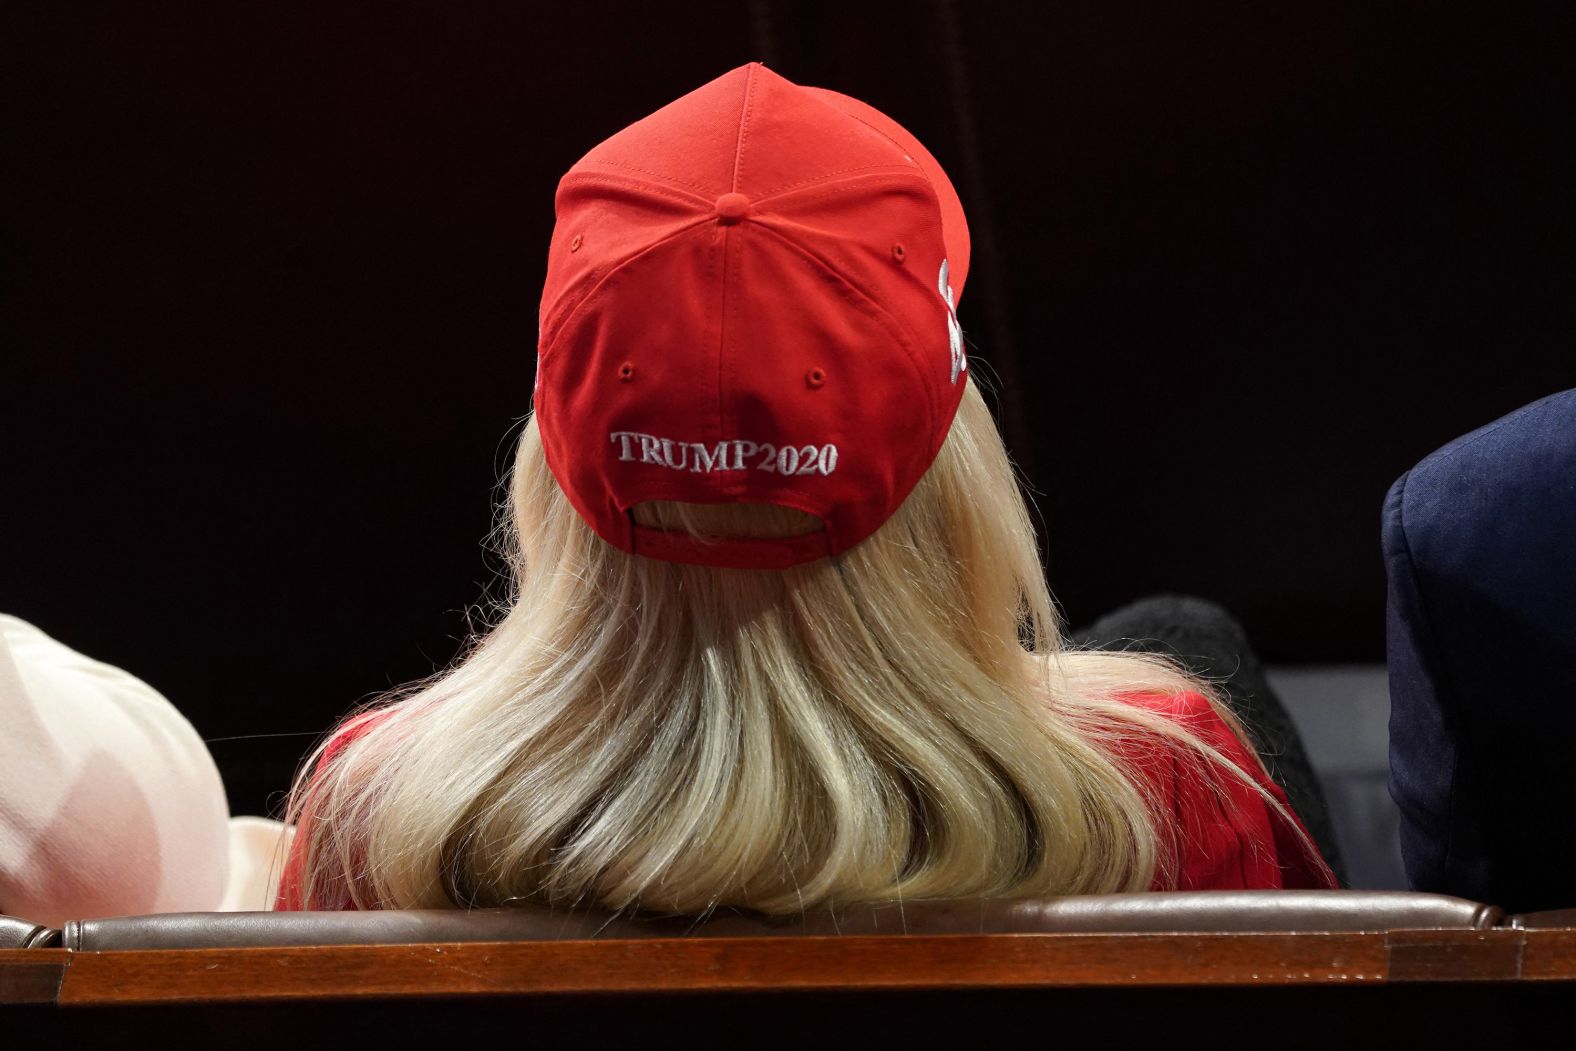 US Rep. Marjorie Taylor Greene wears a Trump 2020 hat as she watches President Biden's State of the Union address on Thursday, March 7. Greene also <a href="index.php?page=&url=https%3A%2F%2Fwww.cnn.com%2Fpolitics%2Flive-news%2Fstate-of-the-union-biden-03-07-24%2Fh_65907ae1e267ca7bd5000100fda34cd0" target="_blank">wore a shirt</a> that said "Say Her Name Laken Riley," calling for stricter border measures and to honor Riley, who authorities believe was killed by an undocumented immigrant in Athens, Georgia.